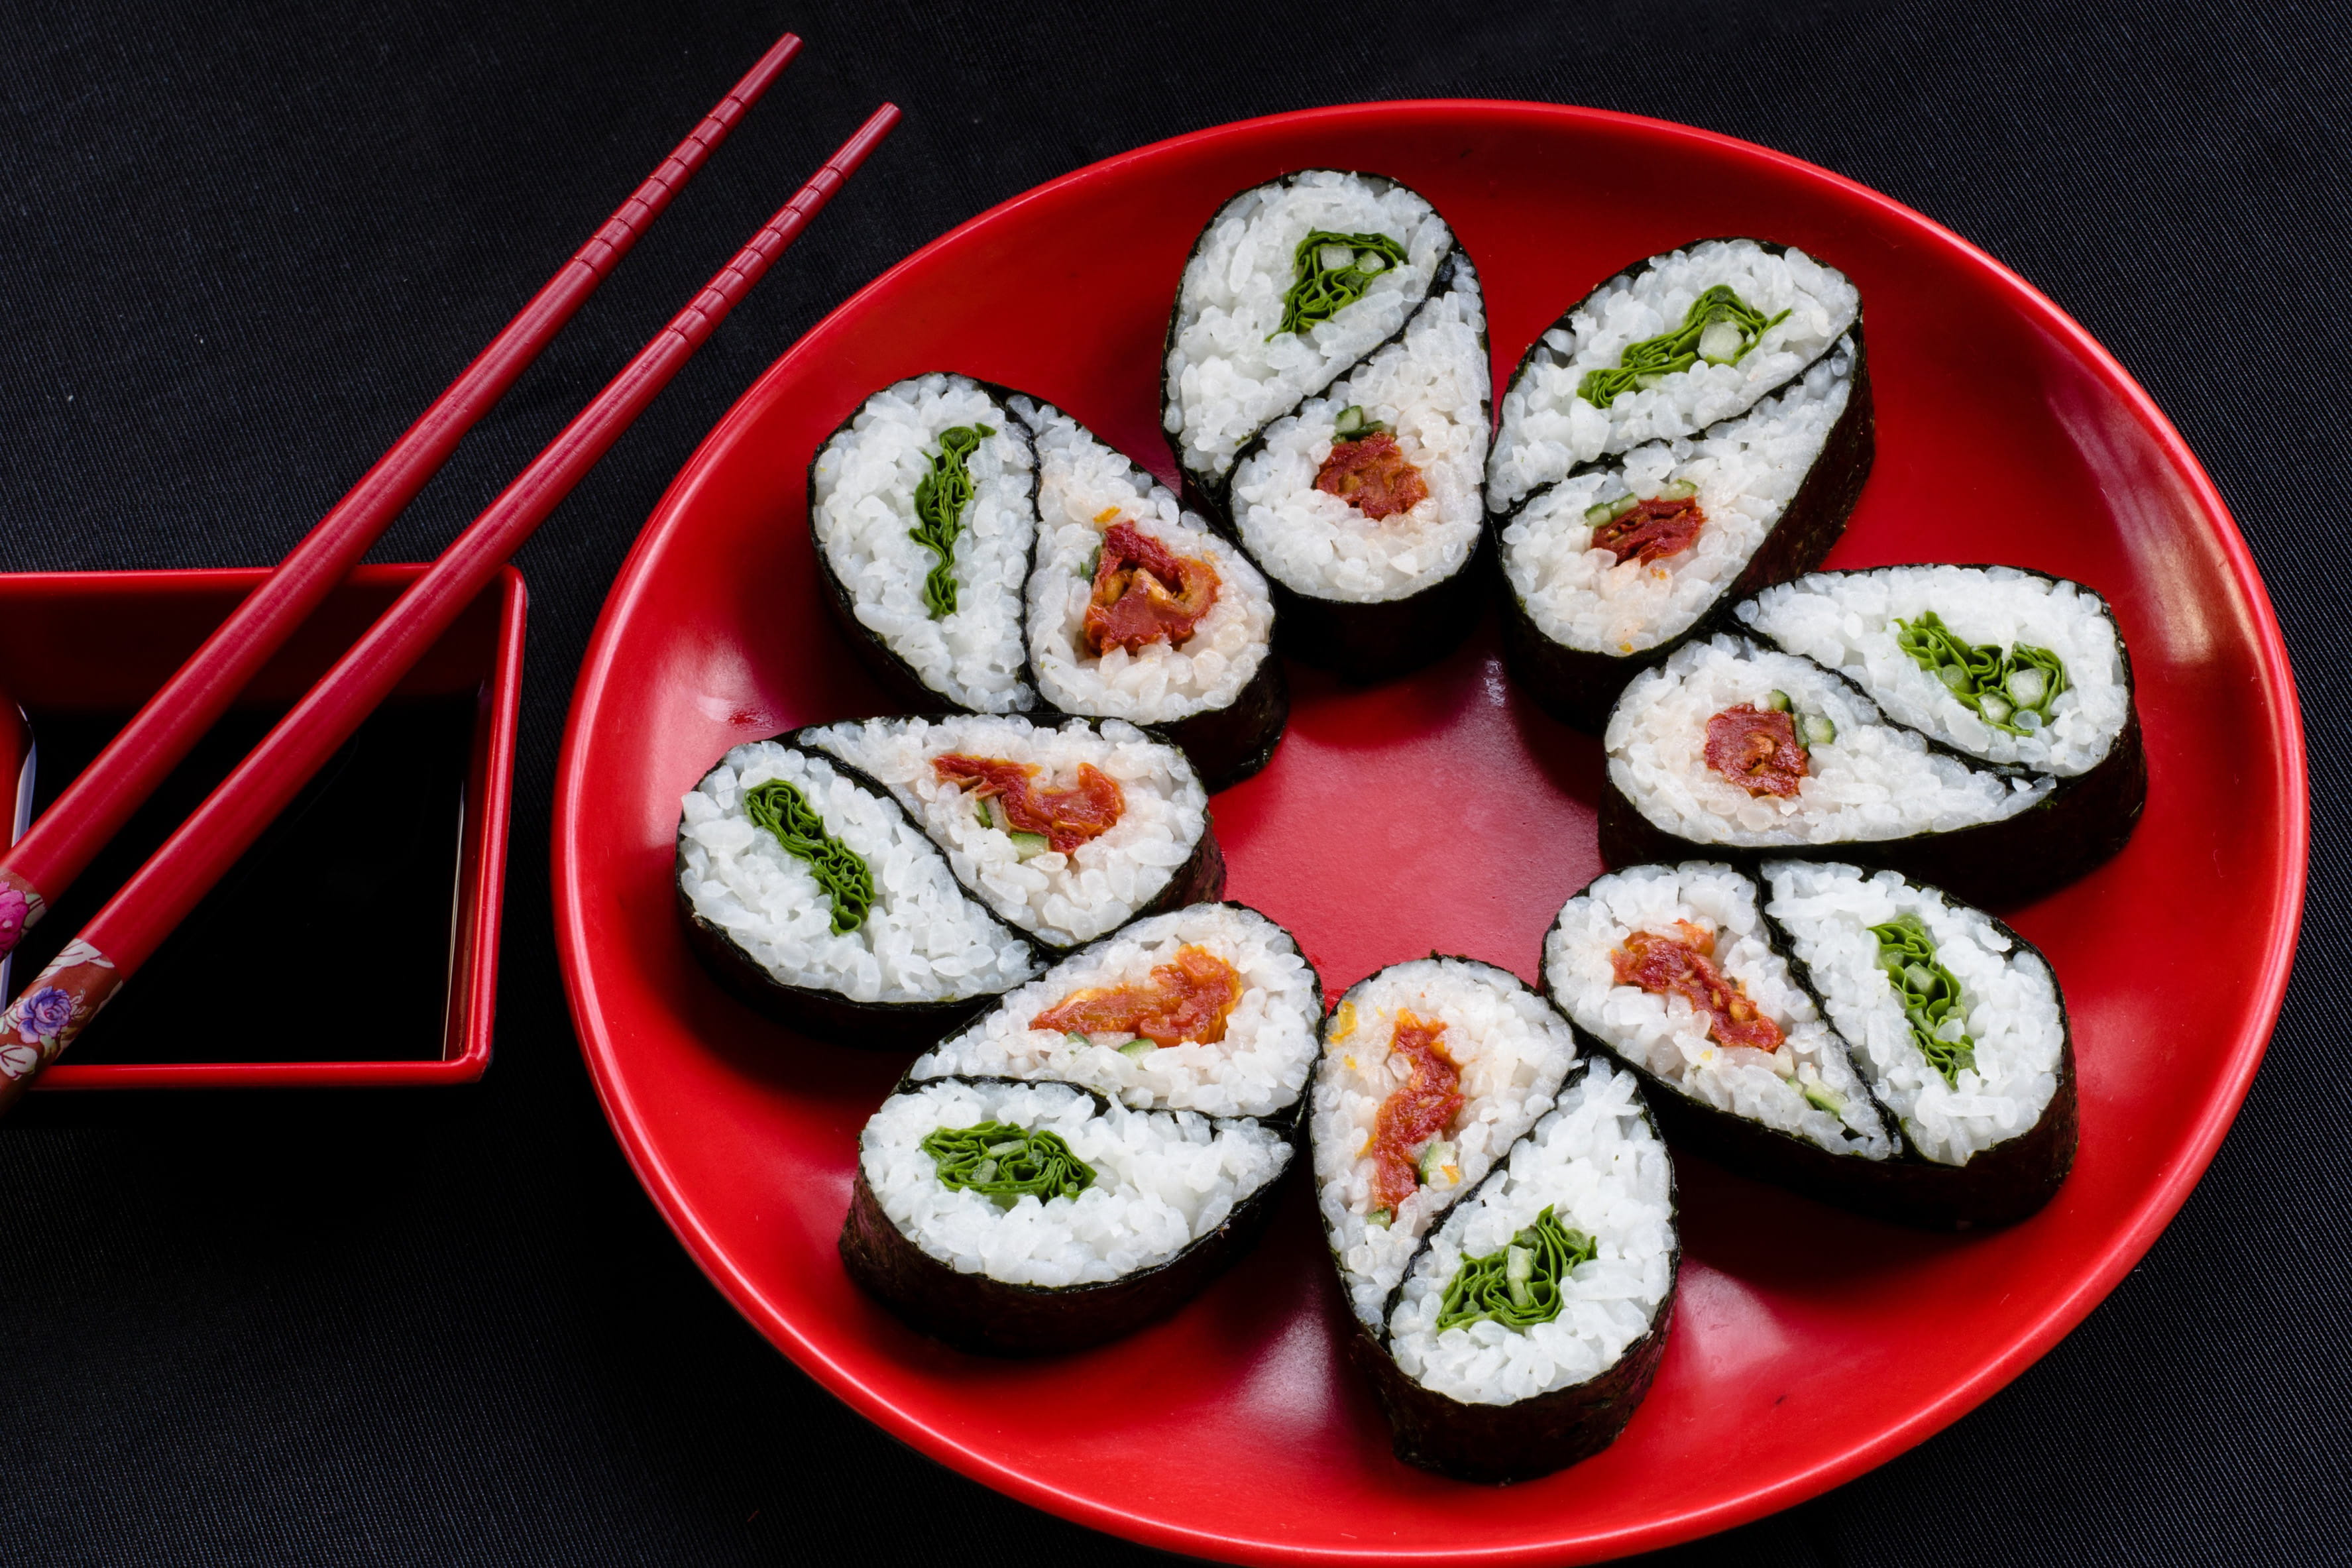 Sushi on Red Plate, food and Drink, hD Wallpaper, japanese food